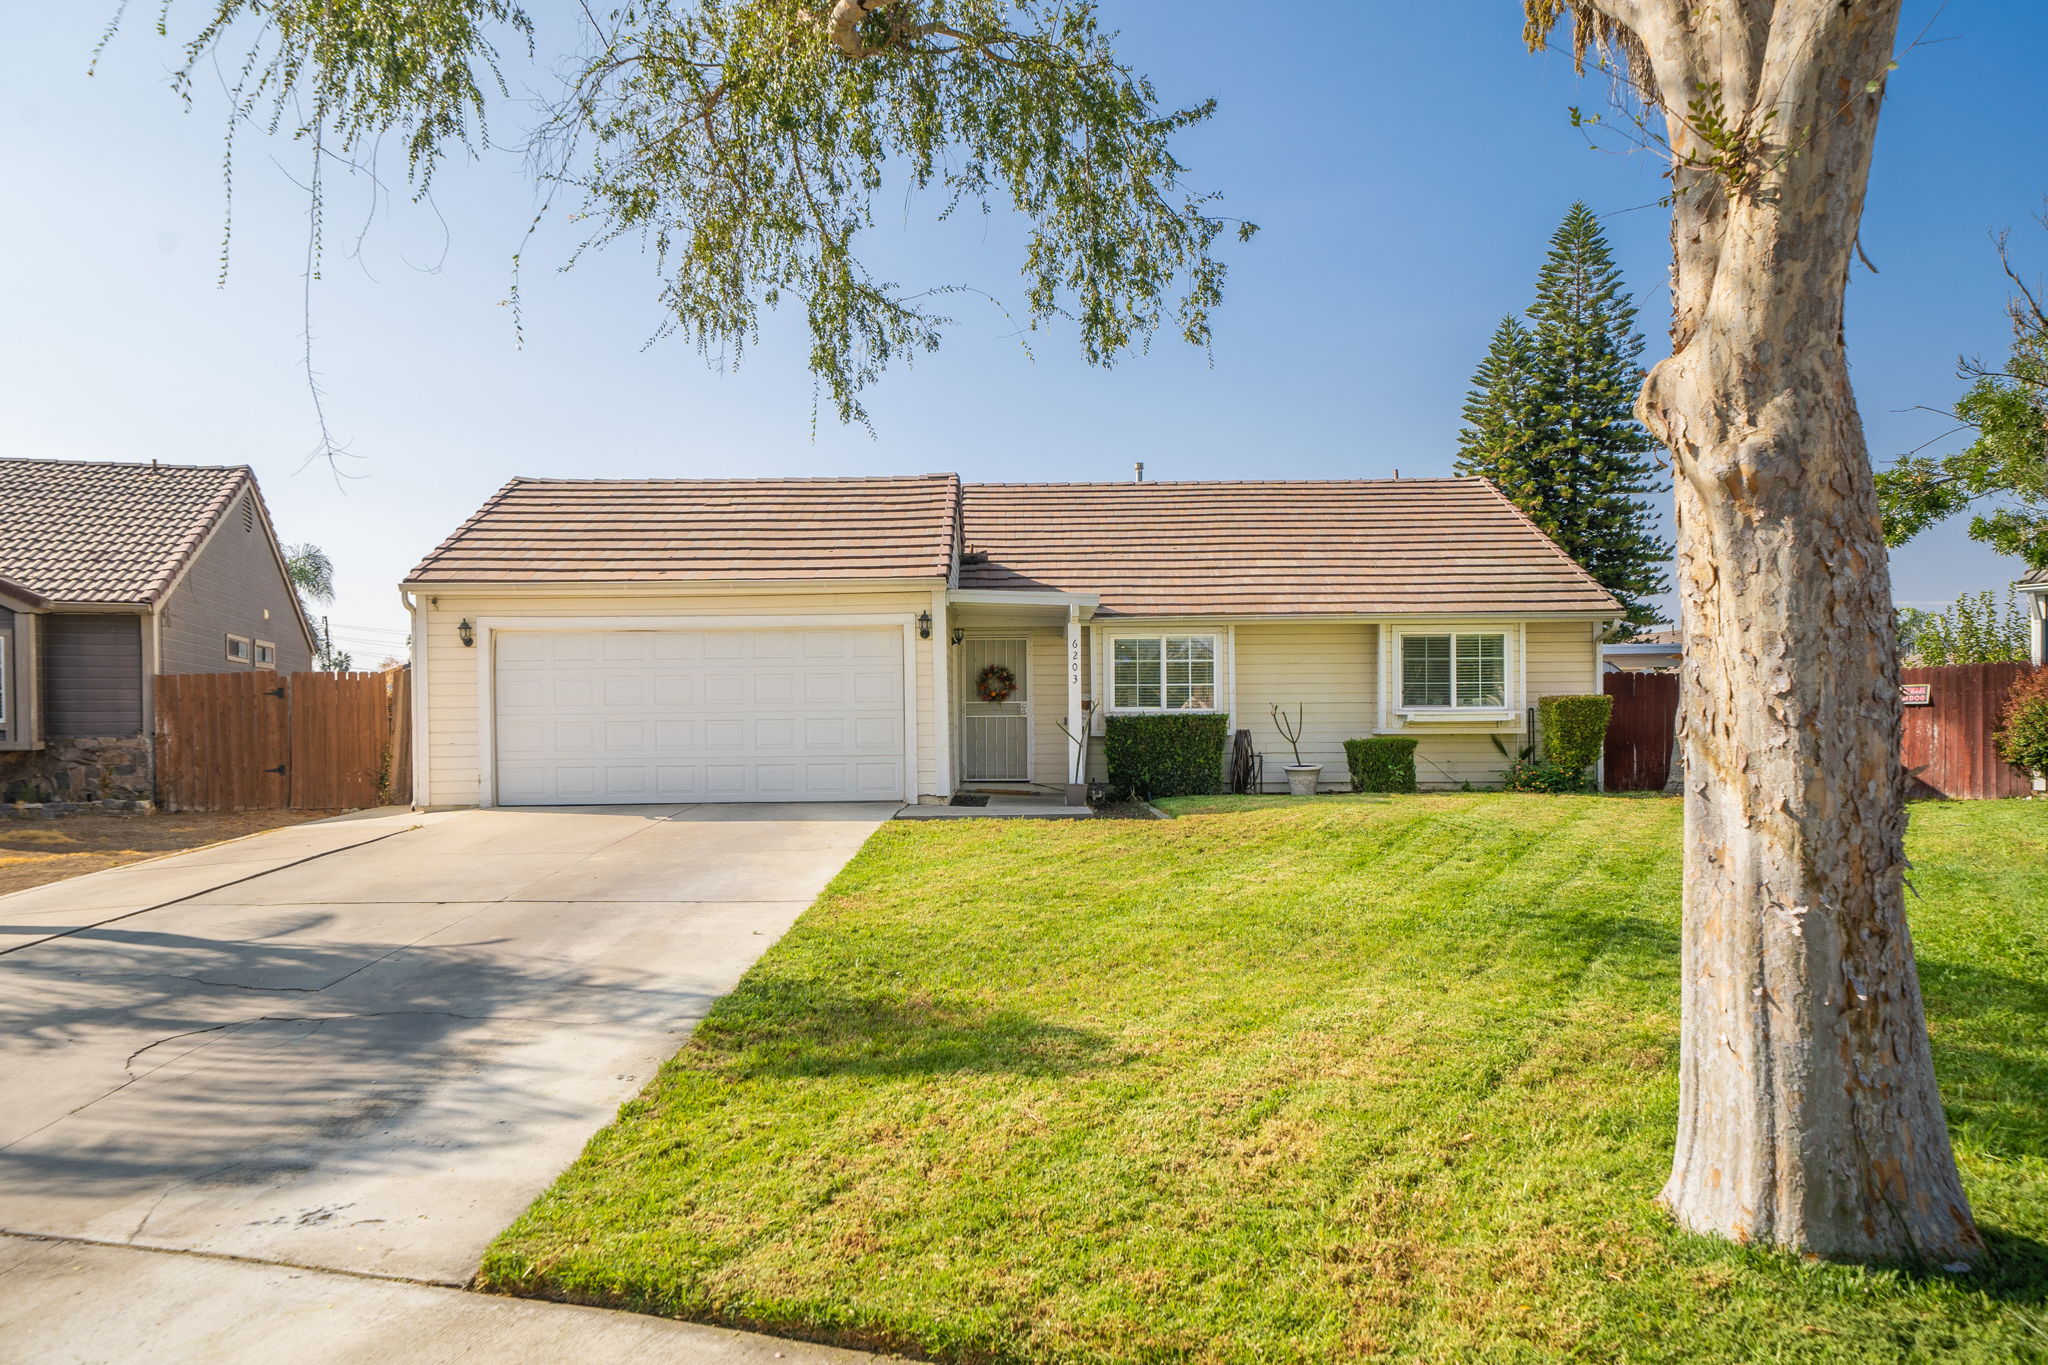  6203 Country View Ln, Riverside, CA 92504, US